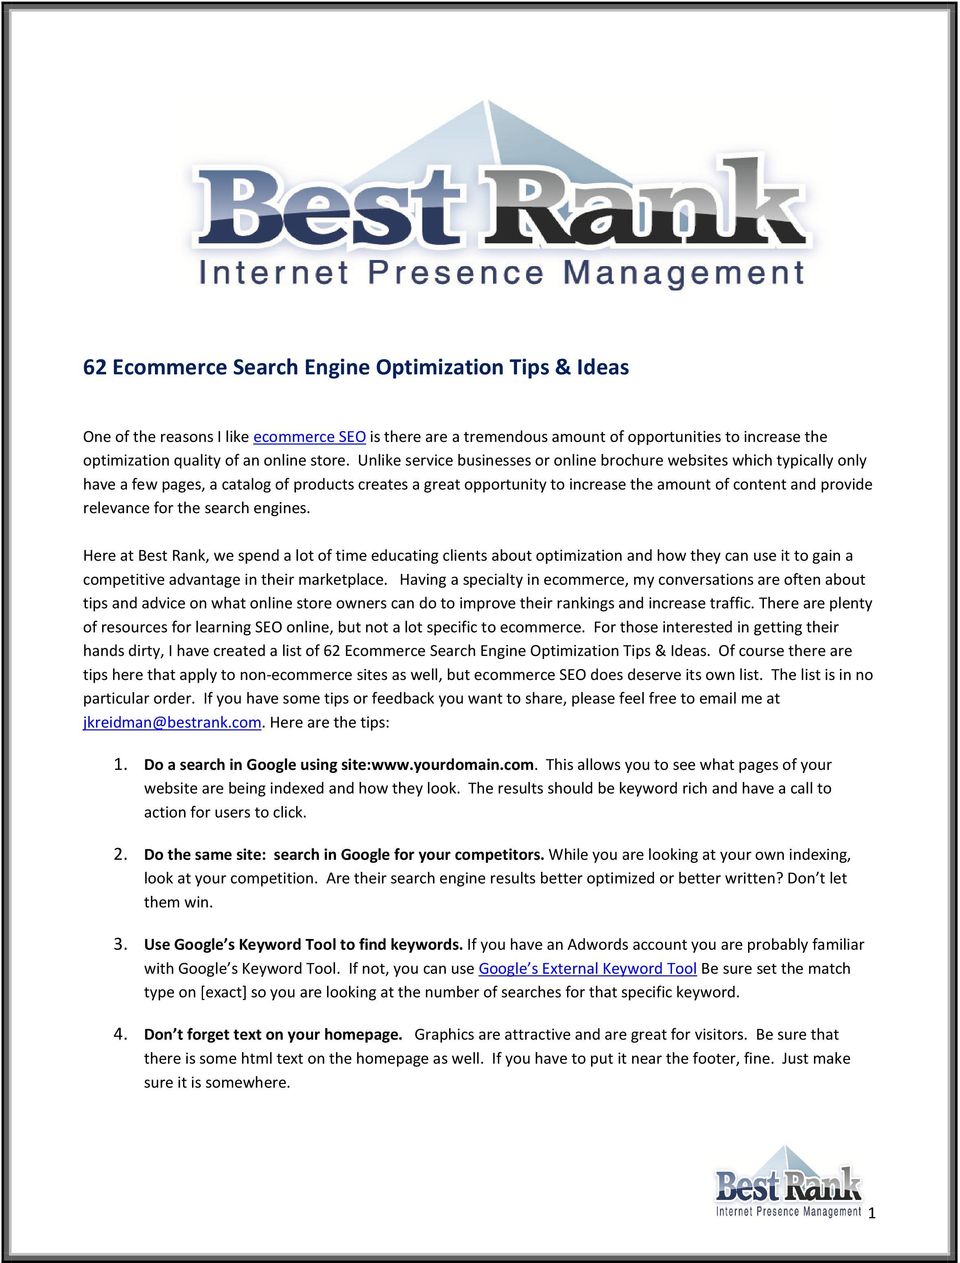 for the search engines. Here at Best Rank, we spend a lot of time educating clients about optimization and how they can use it to gain a competitive advantage in their marketplace.